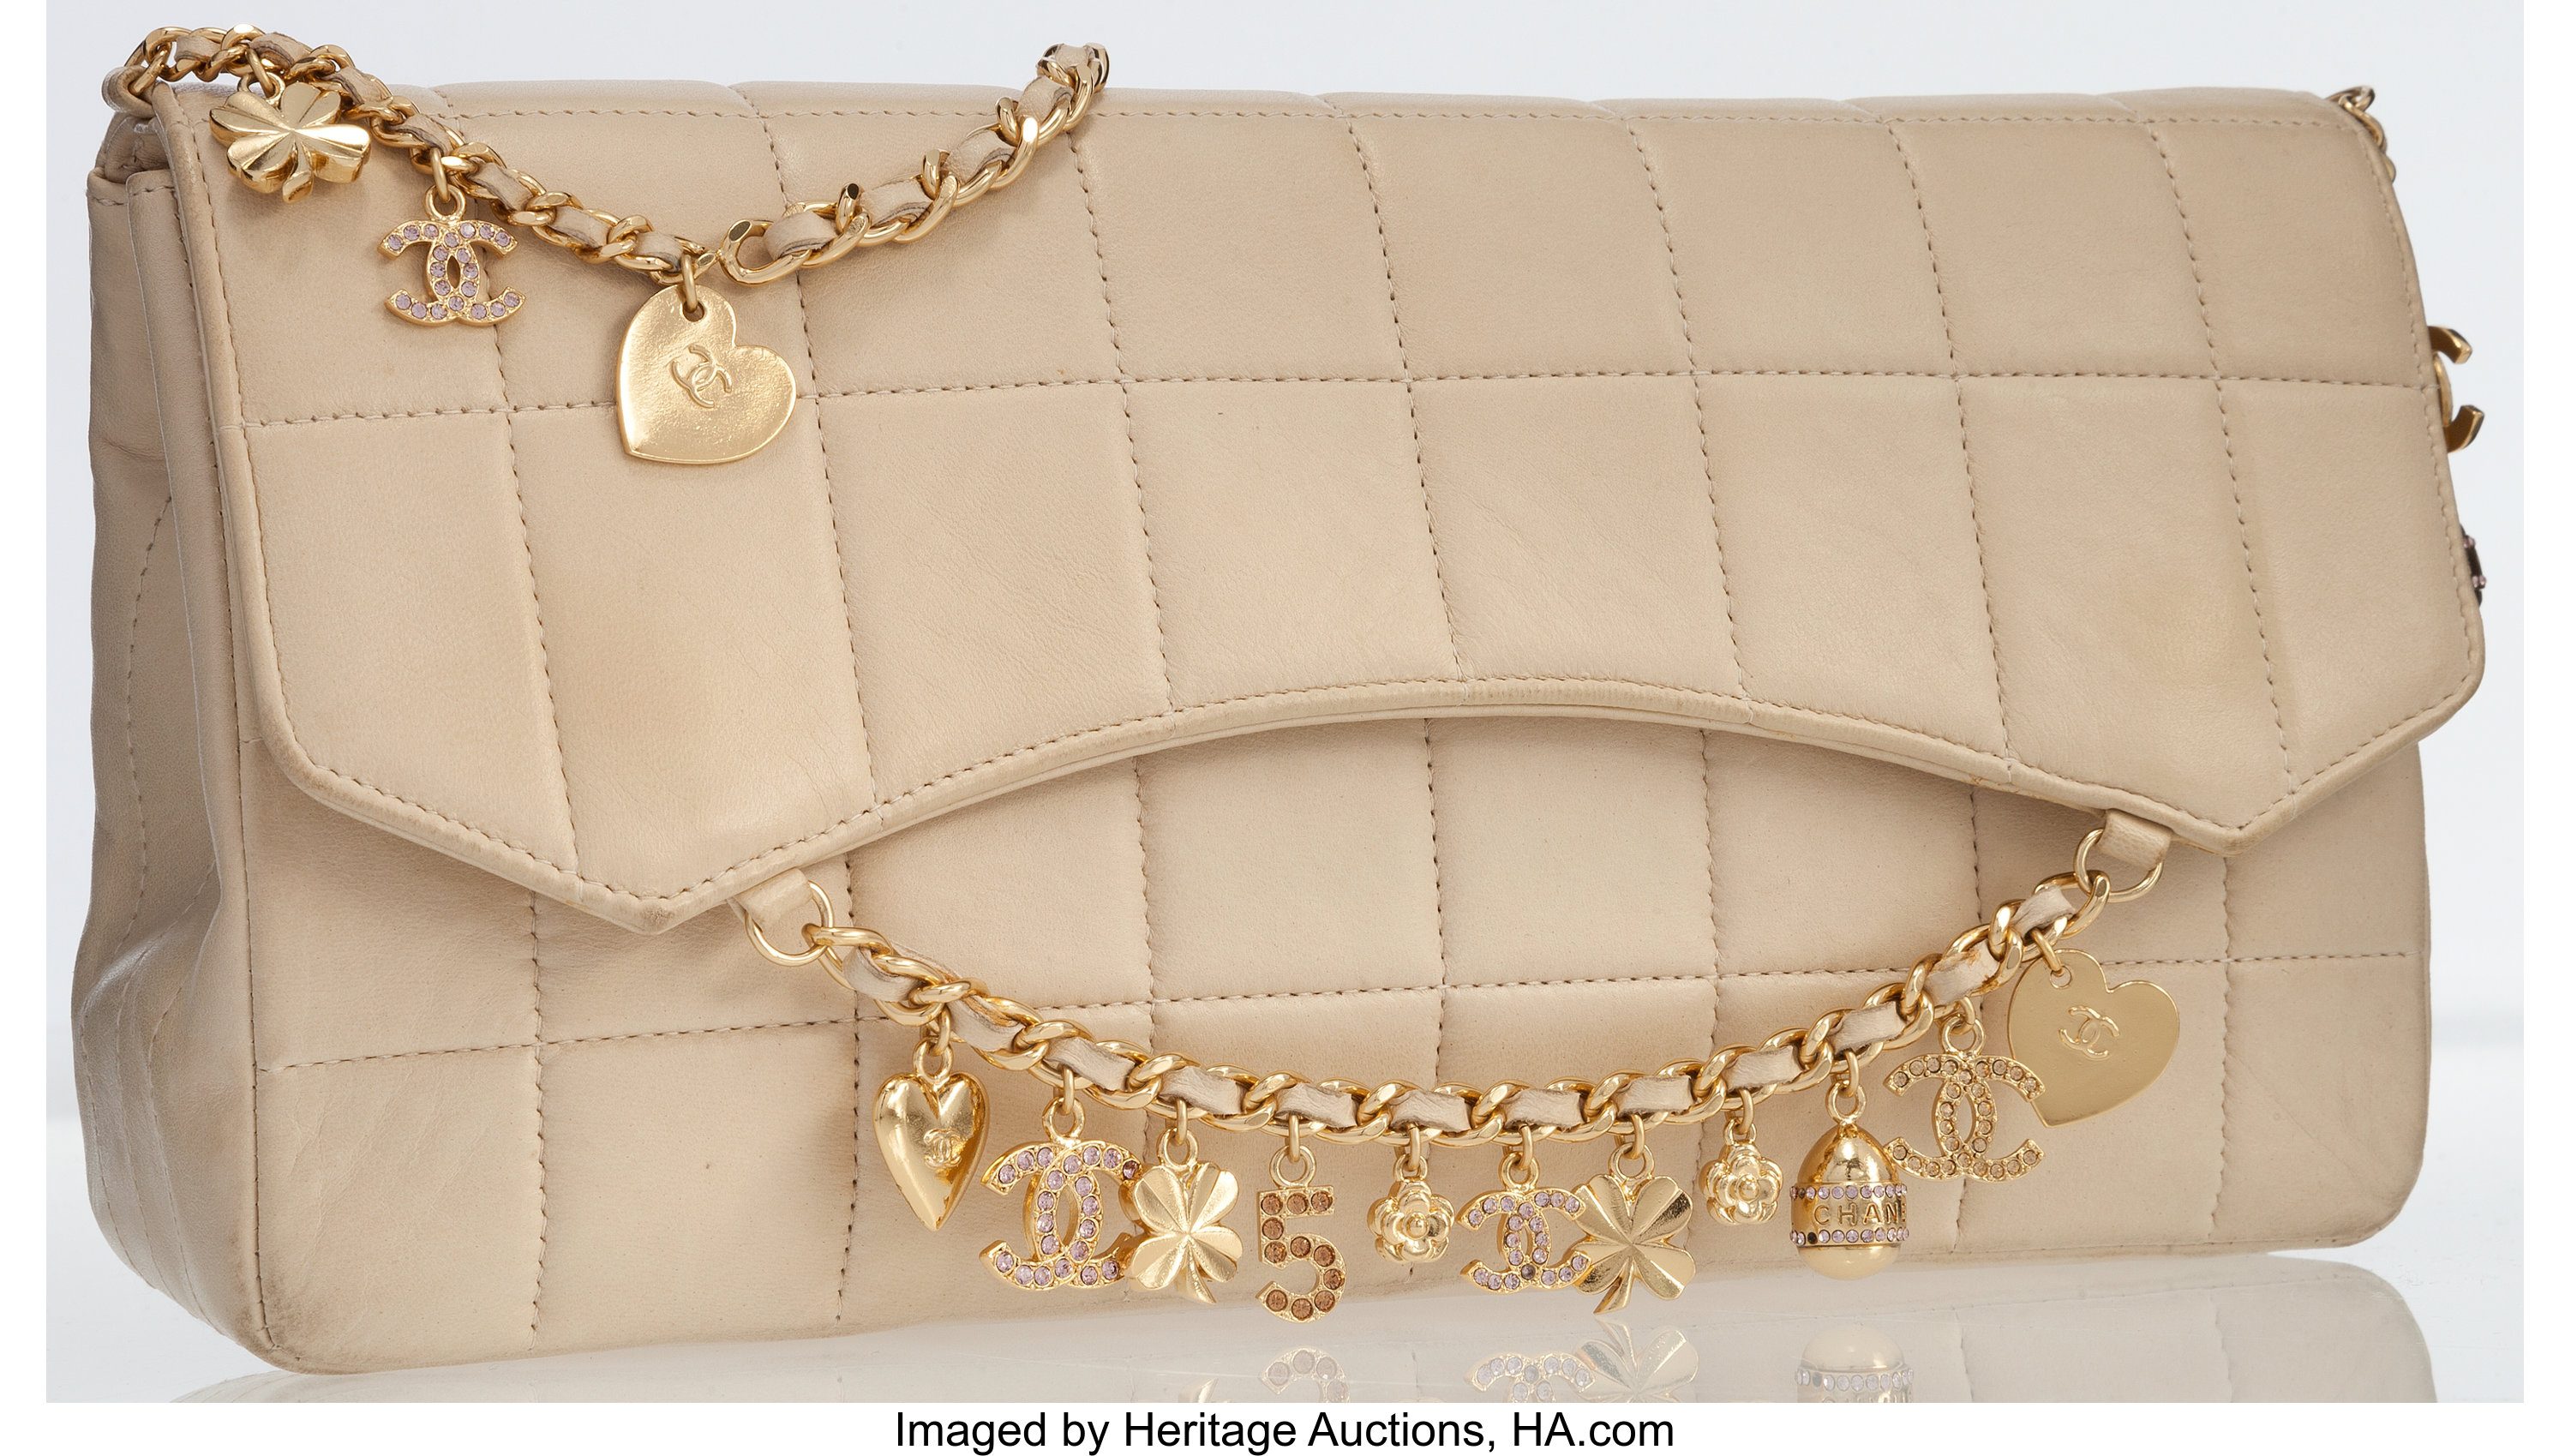 Chanel Beige Lambskin Leather Medium Flap Bag with Gold Charm